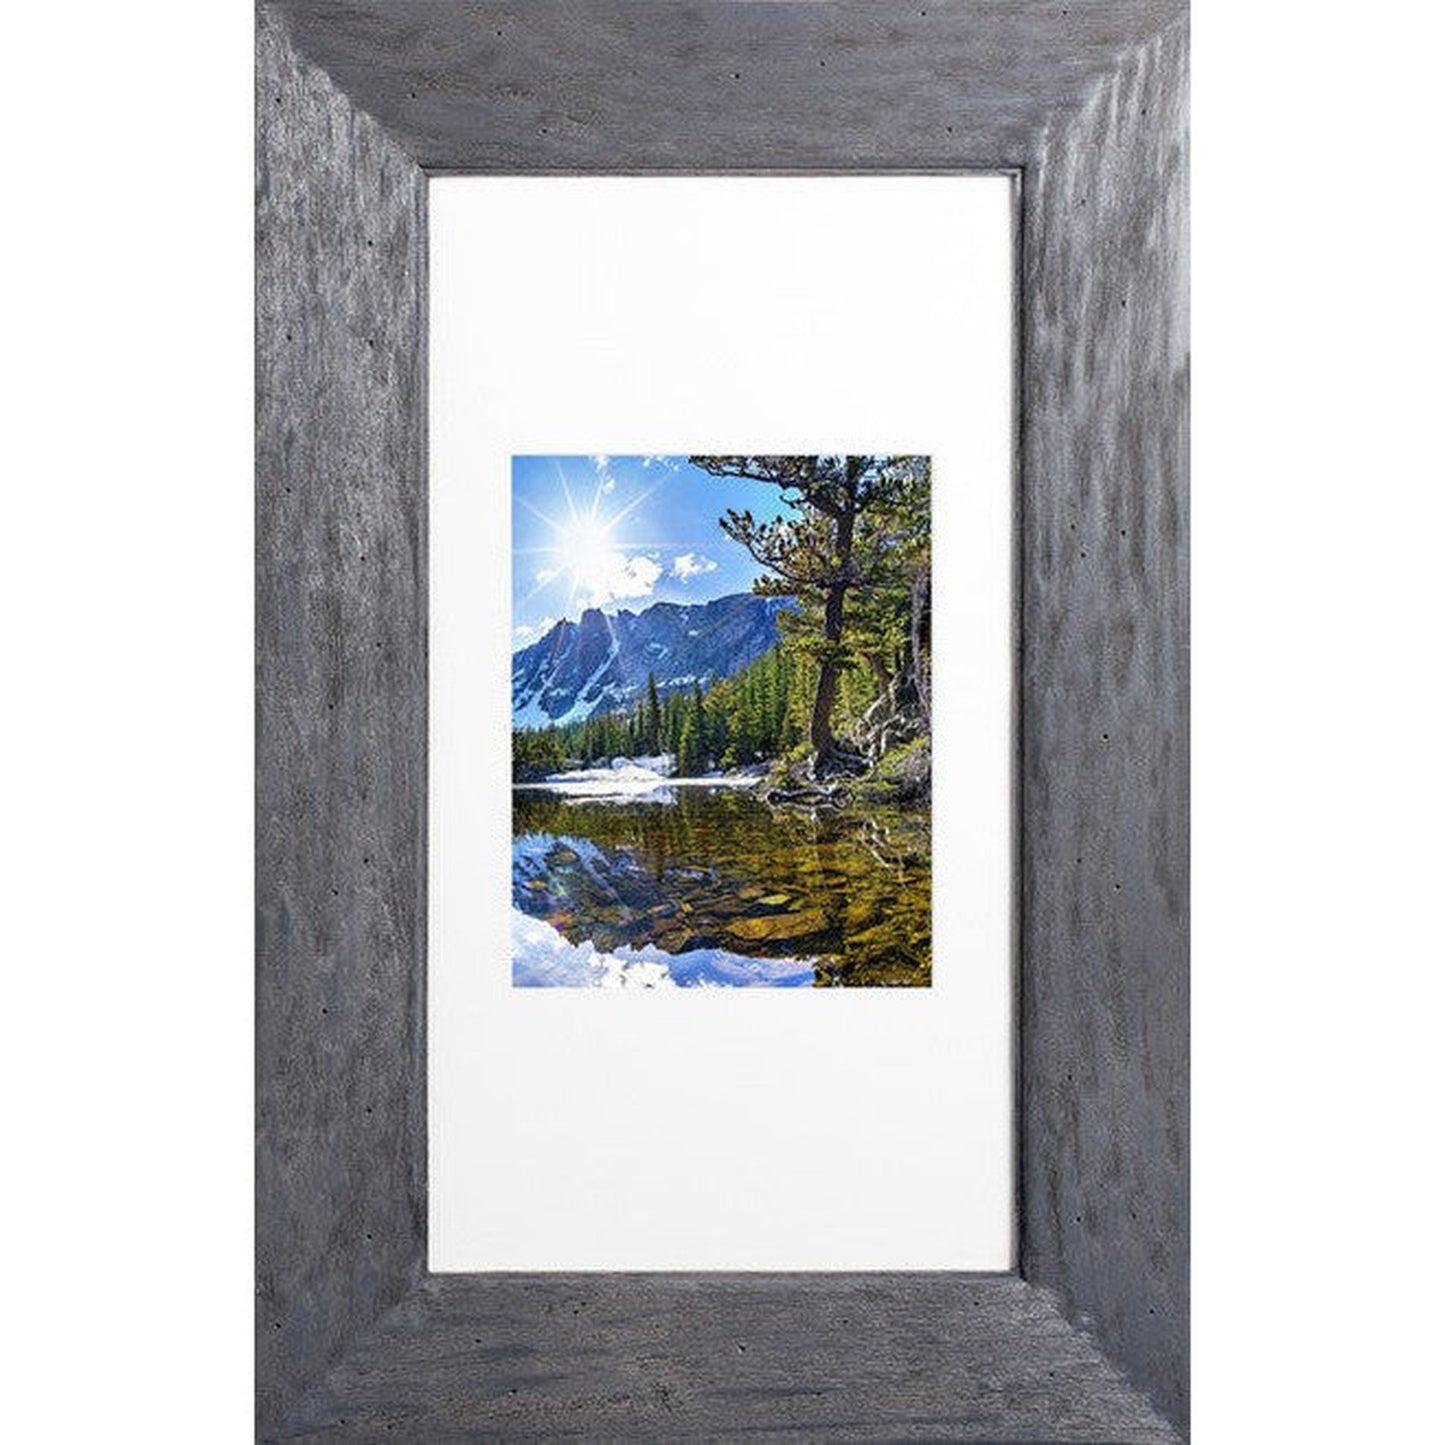 Fox Hollow Furnishings 14" x 24" Rustic Gray Extra Large Standard 4" Depth Natural Interior Recessed Picture Frame Medicine Cabinet With Mirror and Black 8" x 10" Matting